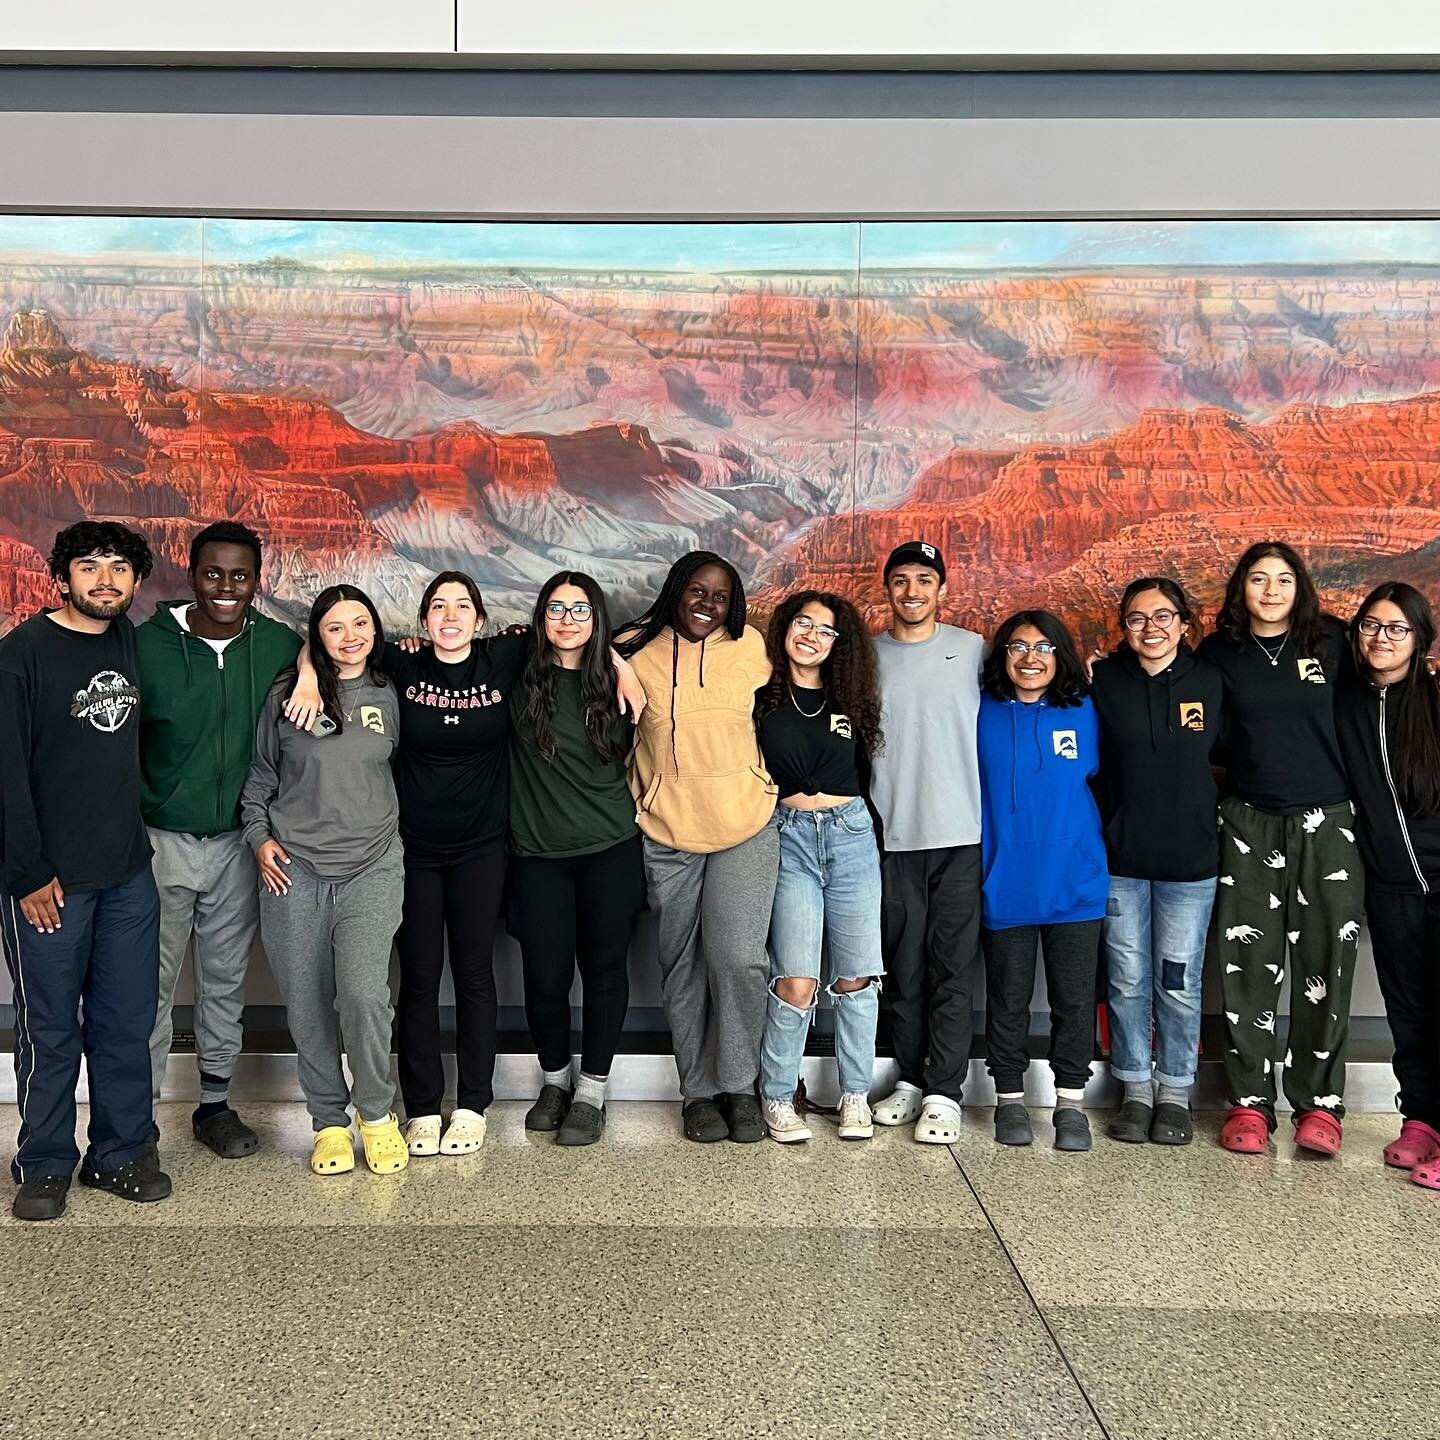 Some STEPPERs returned home from the wilderness of Alaska and by all appearances, they&rsquo;re alllll smiles 😁😁😁😁😁😁😁 We can&rsquo;t wait to share stories of their adventures! #thisisstep #steppersinaction #stepcollegeprep